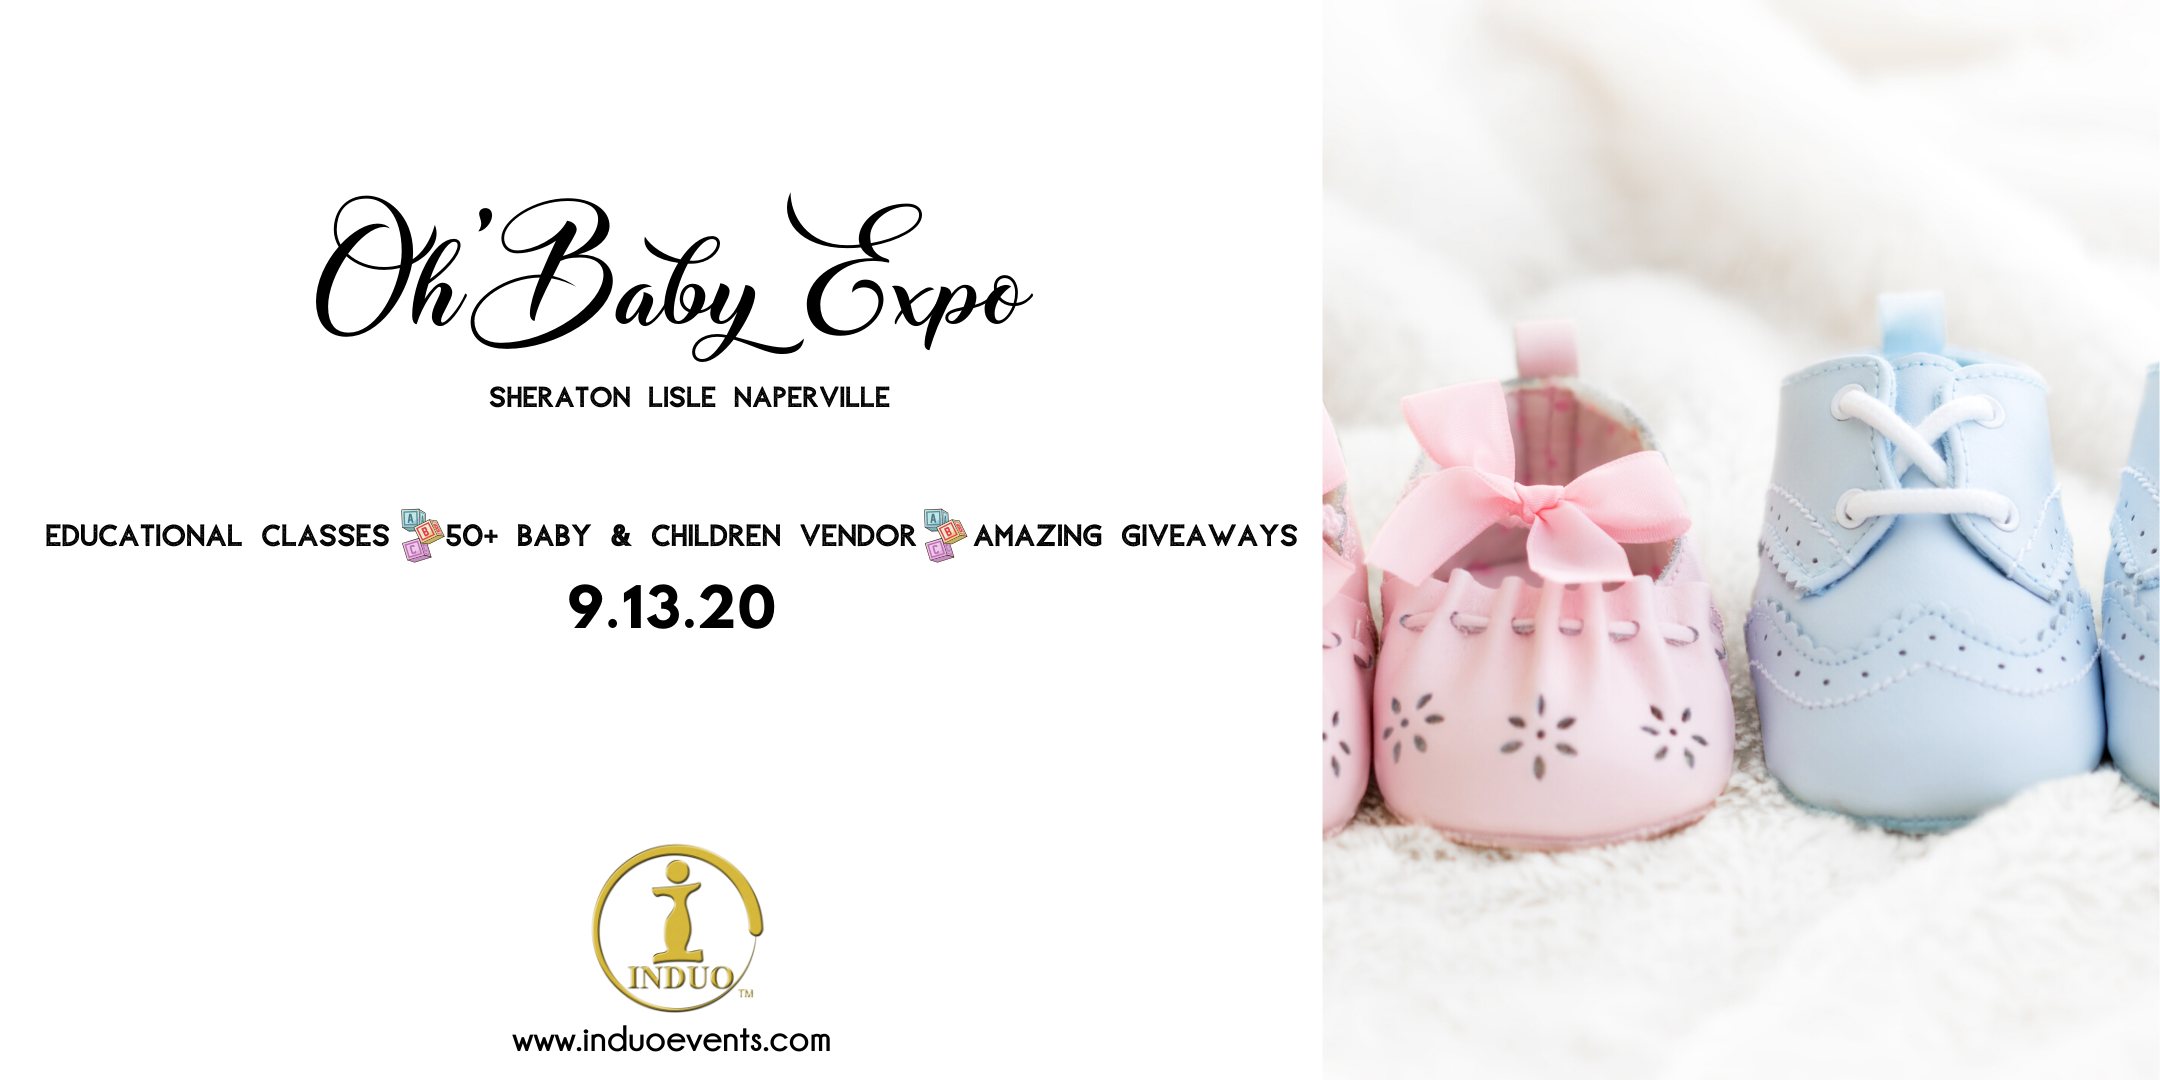 Induo's 3rd Annual Oh' Baby Expo for New & Expecting Parents! 